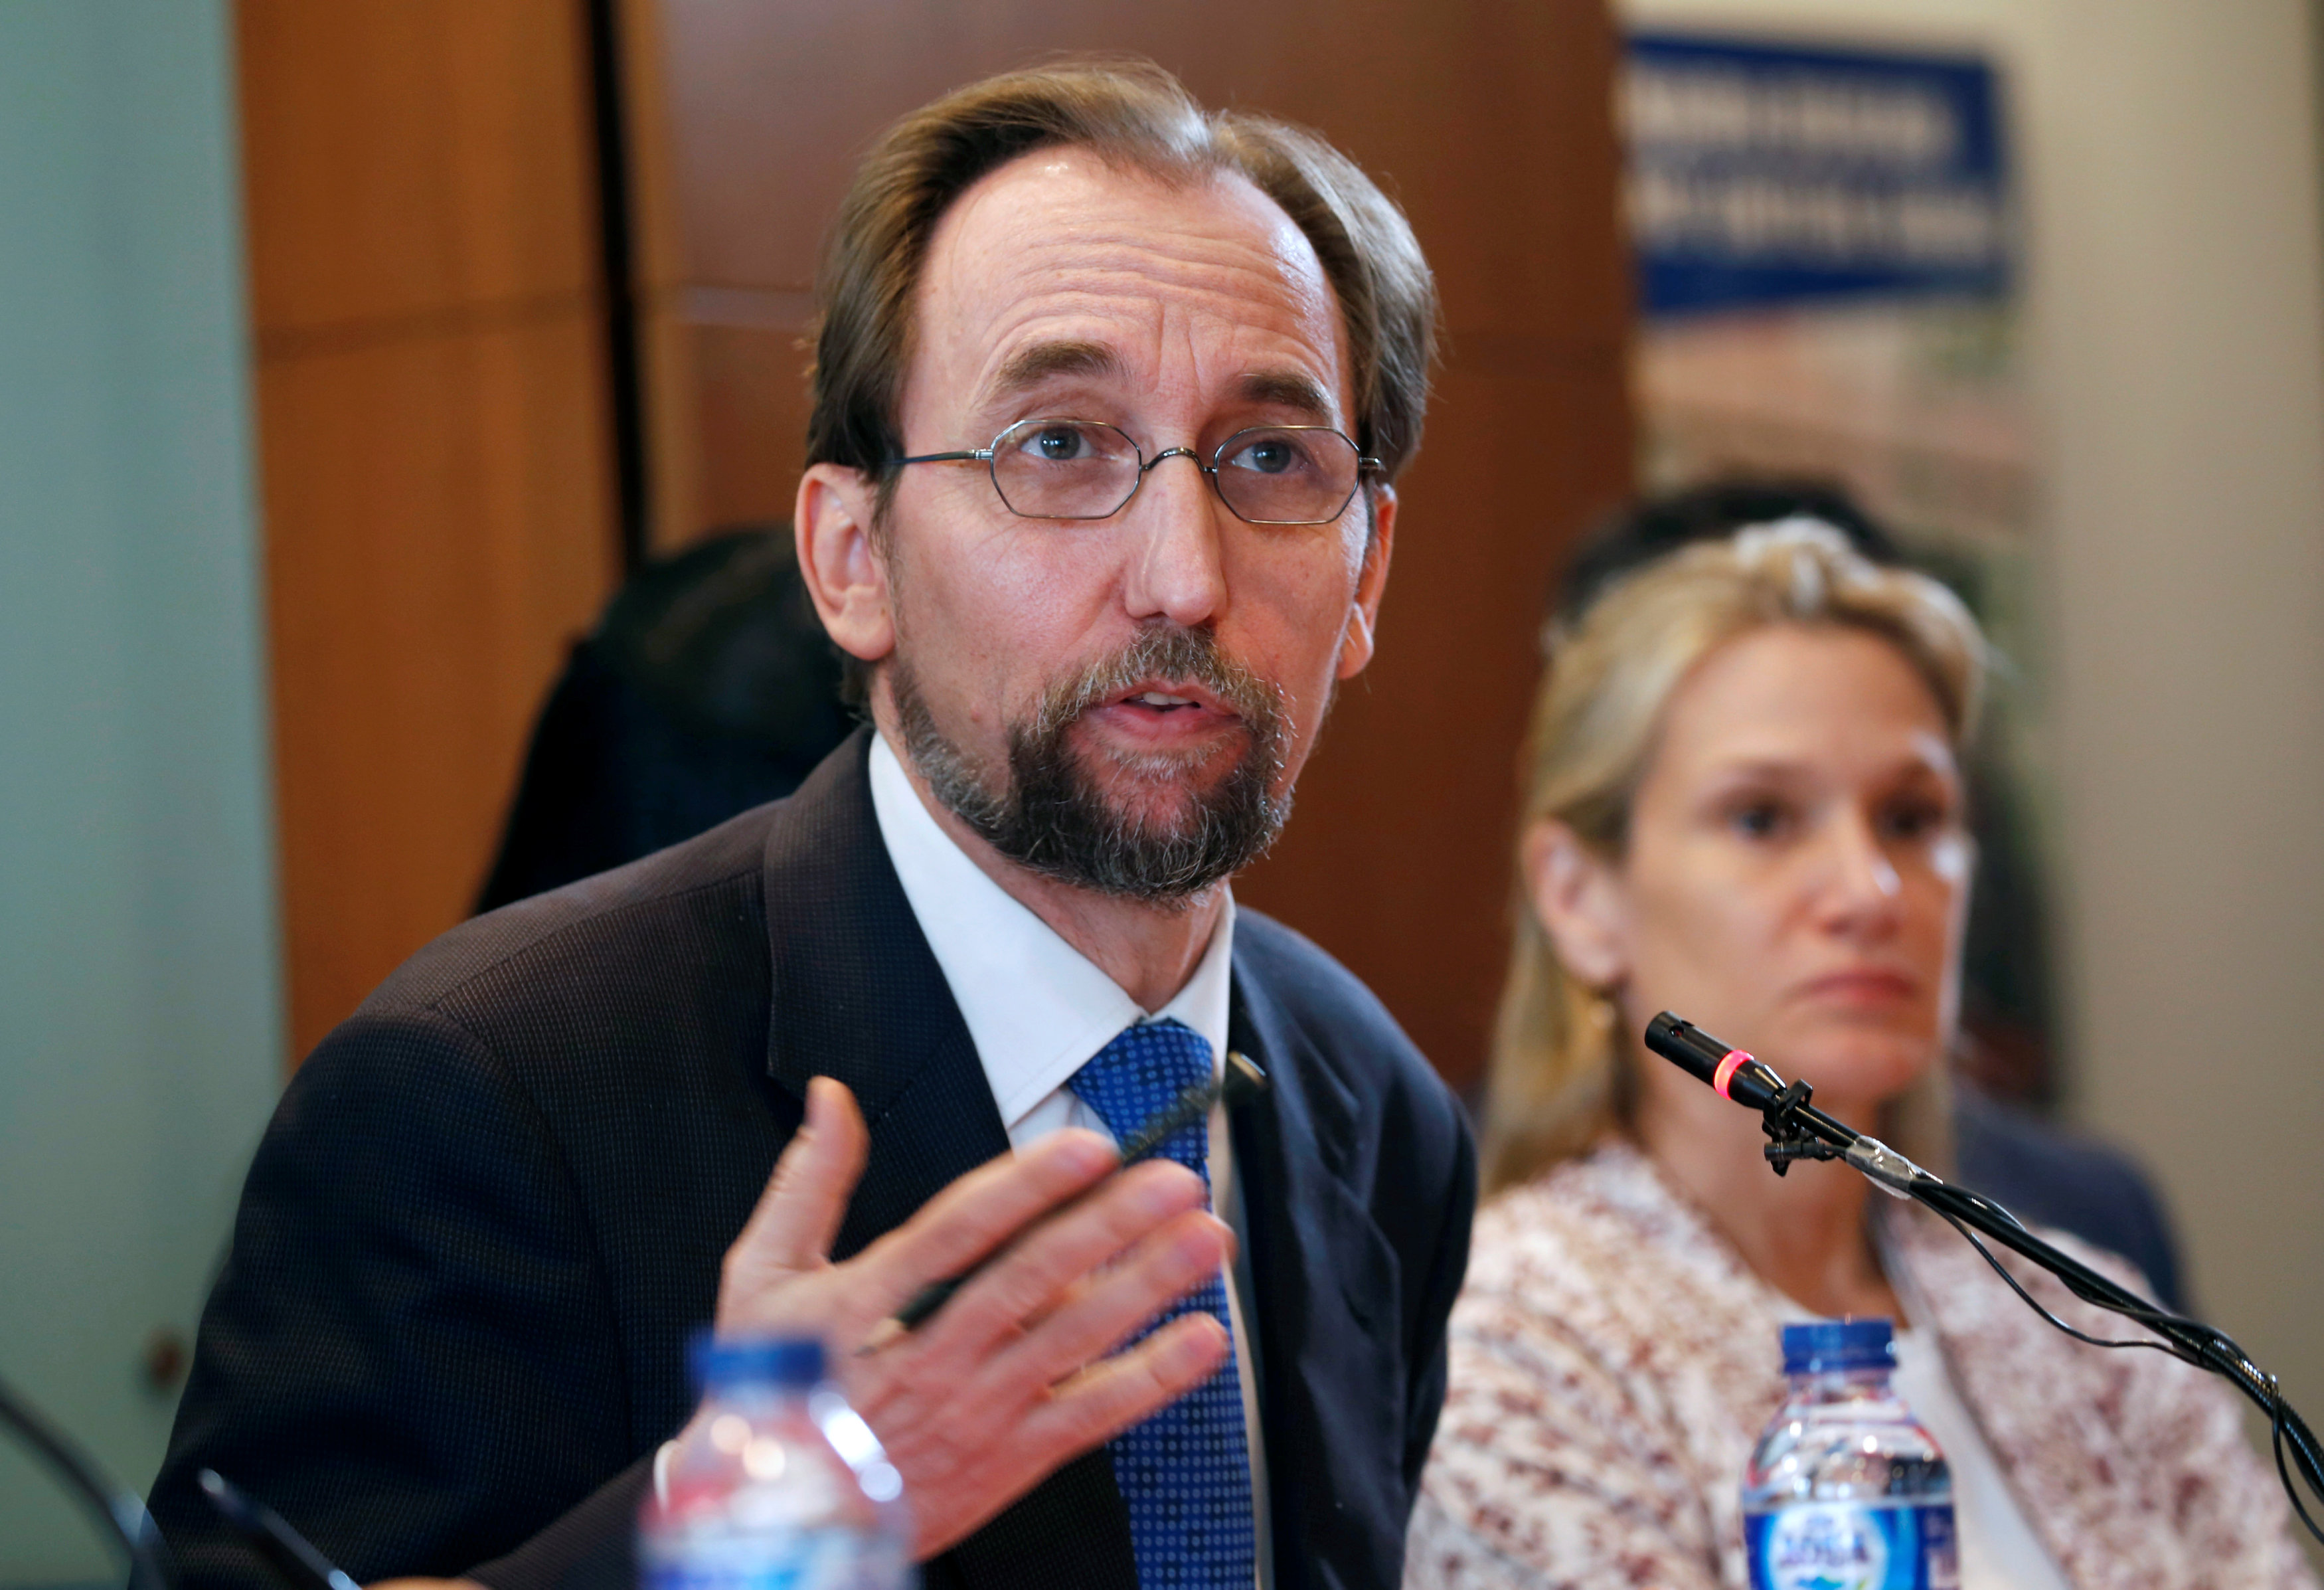 Th UN High Commissoner of Human Rights, Zeid Ra’ad Al Hussein, in February (by Reuters)